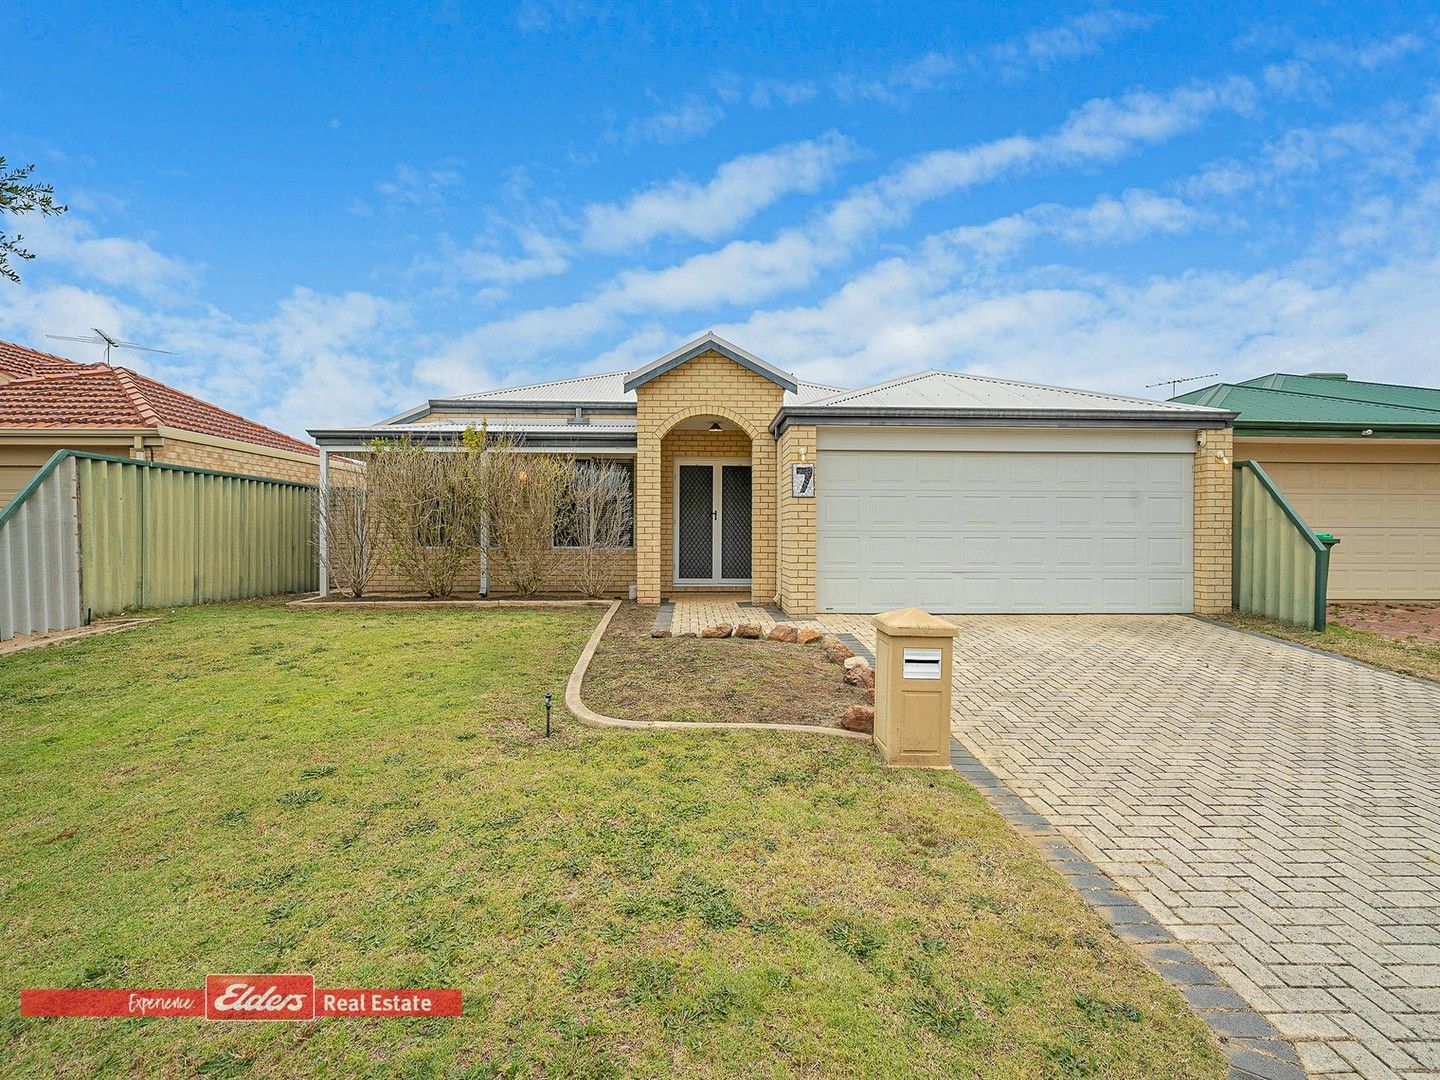 4 bedrooms House in 7 Carlingford Drive PORT KENNEDY WA, 6172